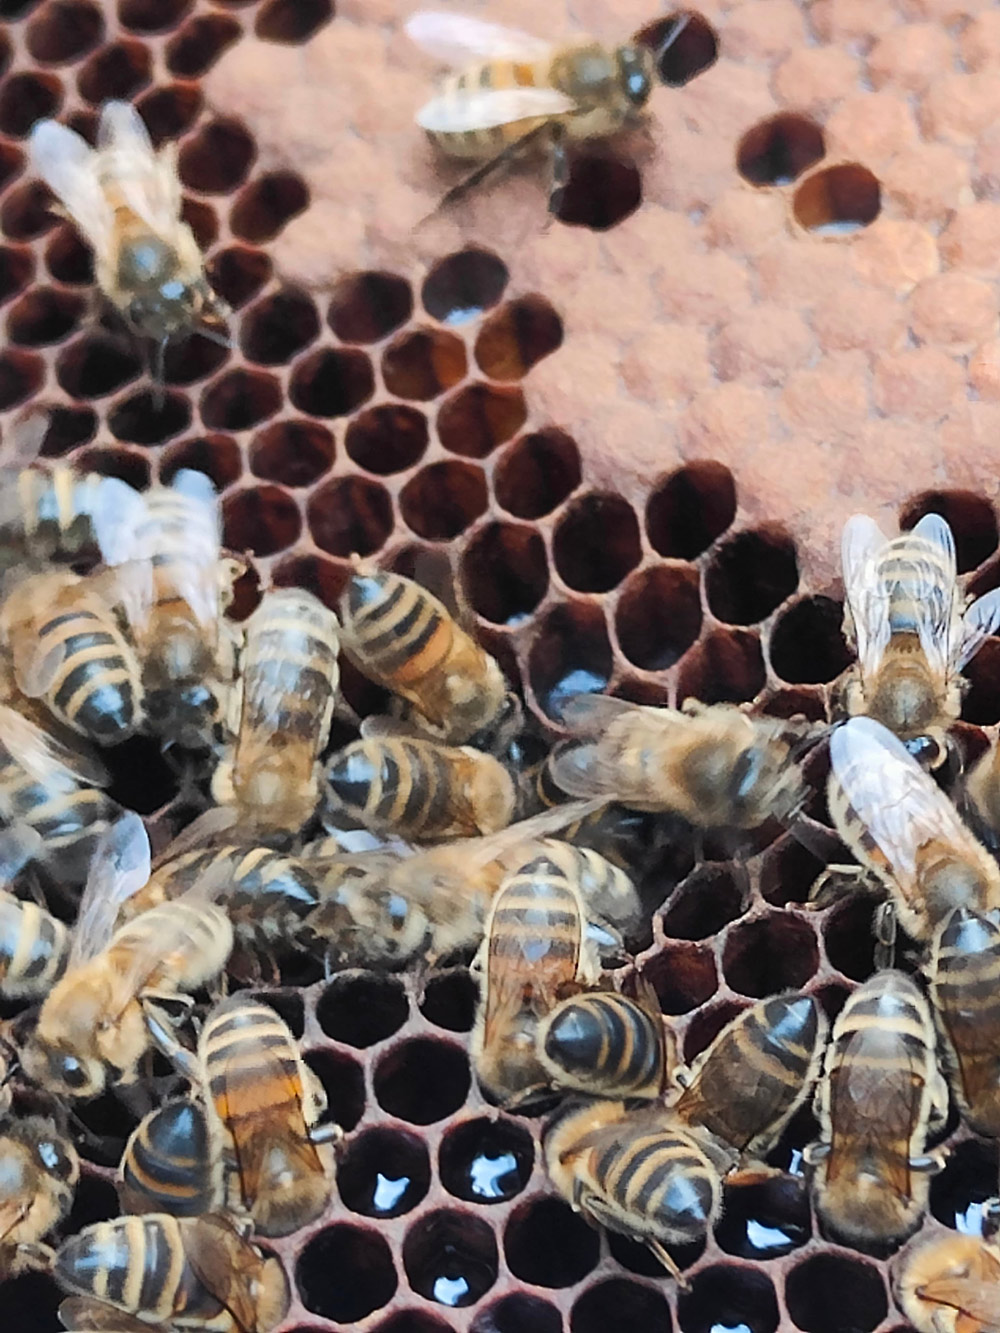 Marvin’s bees, up close